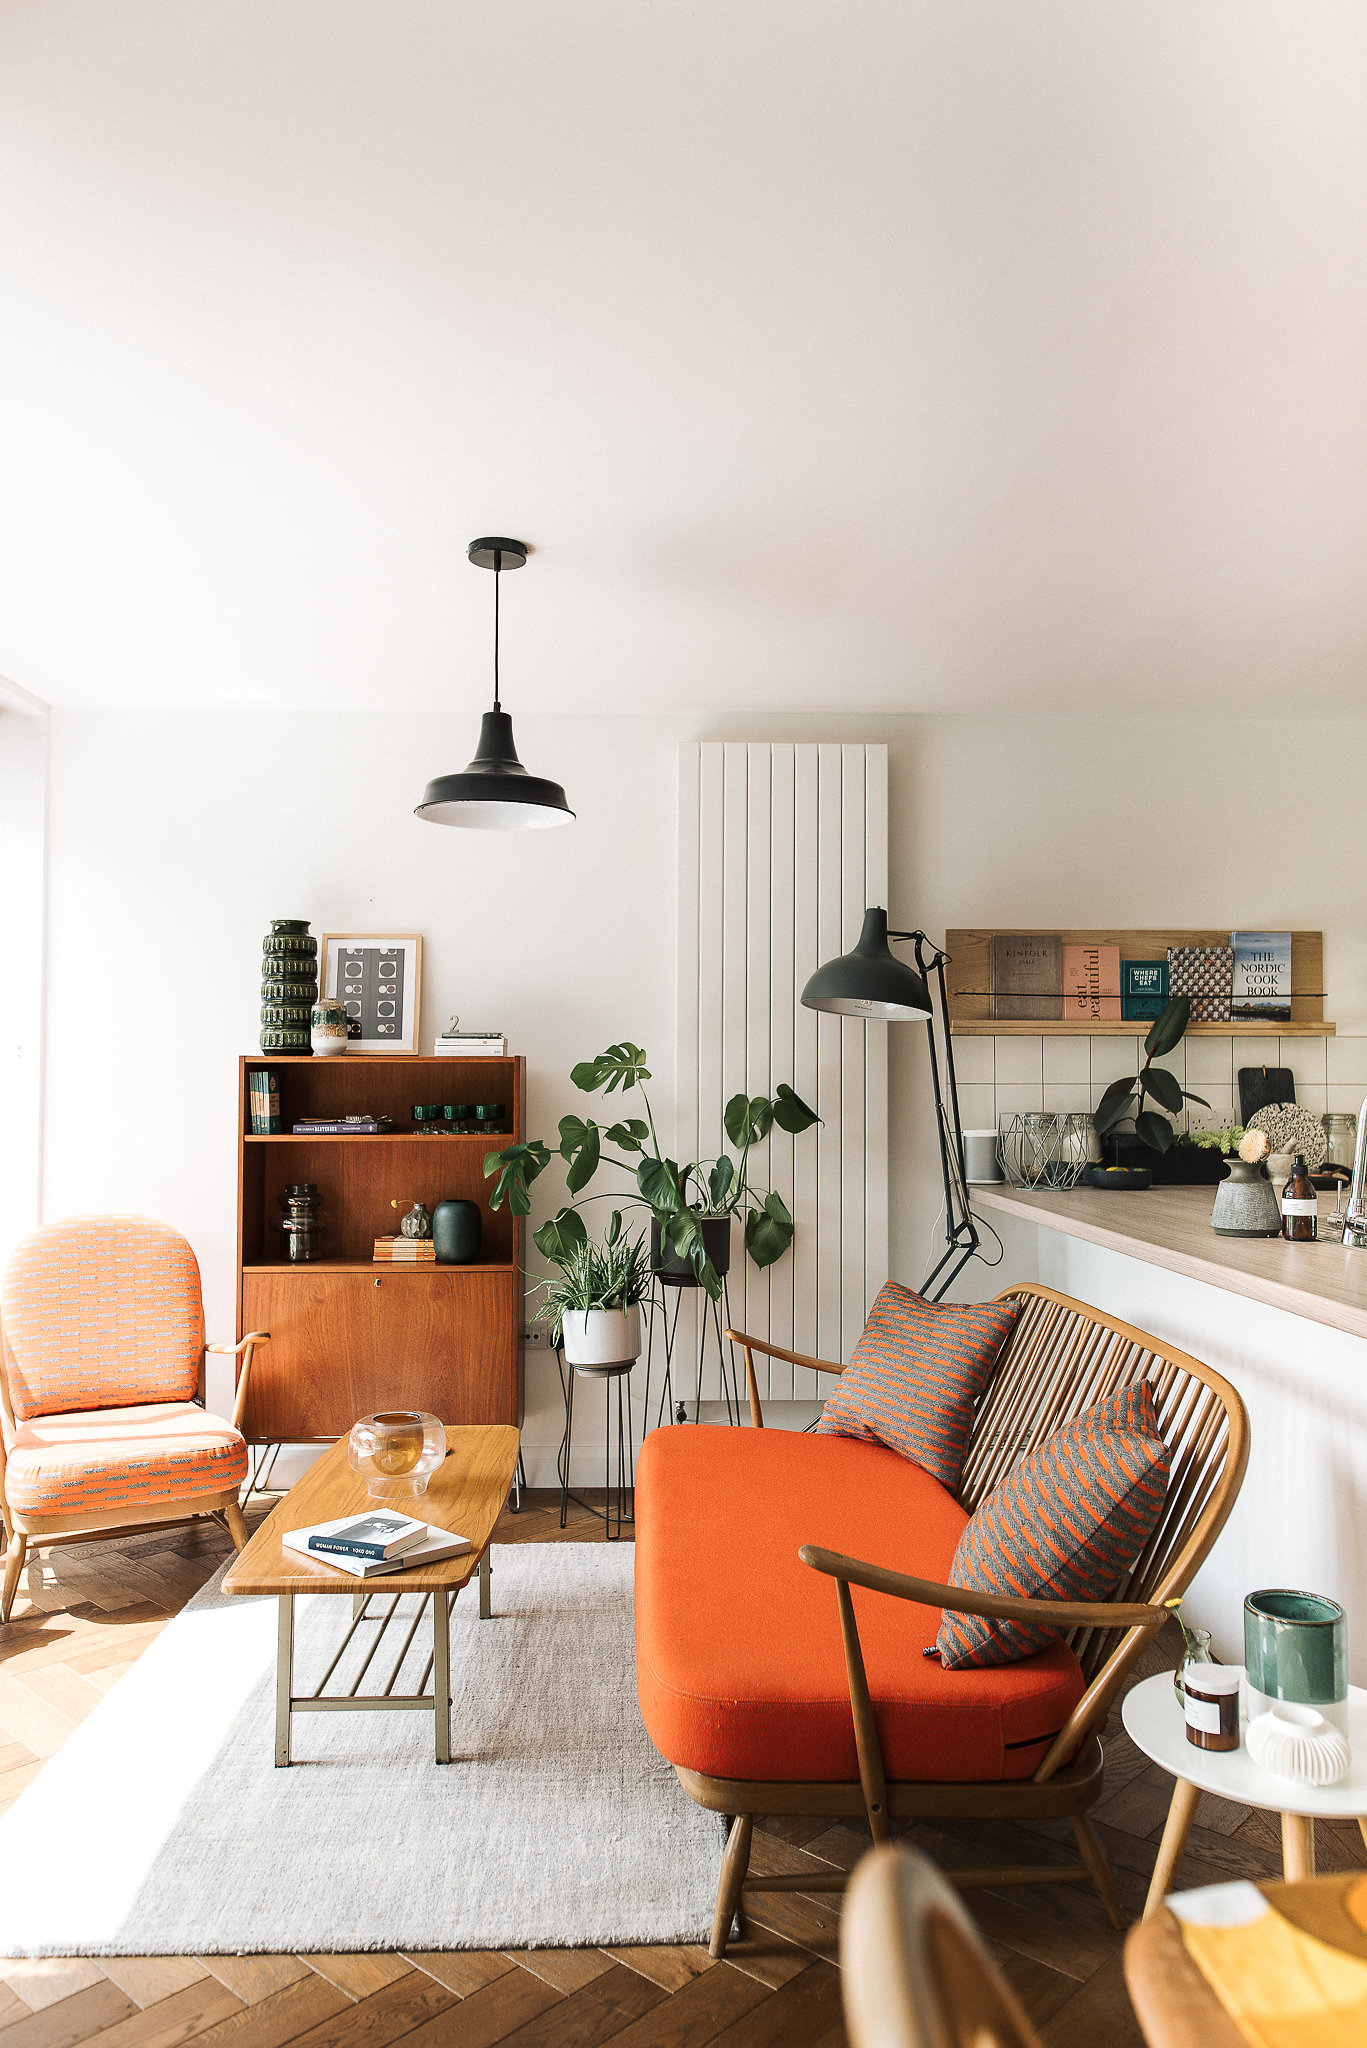 Home tour with Racheal & Alex of Object Style